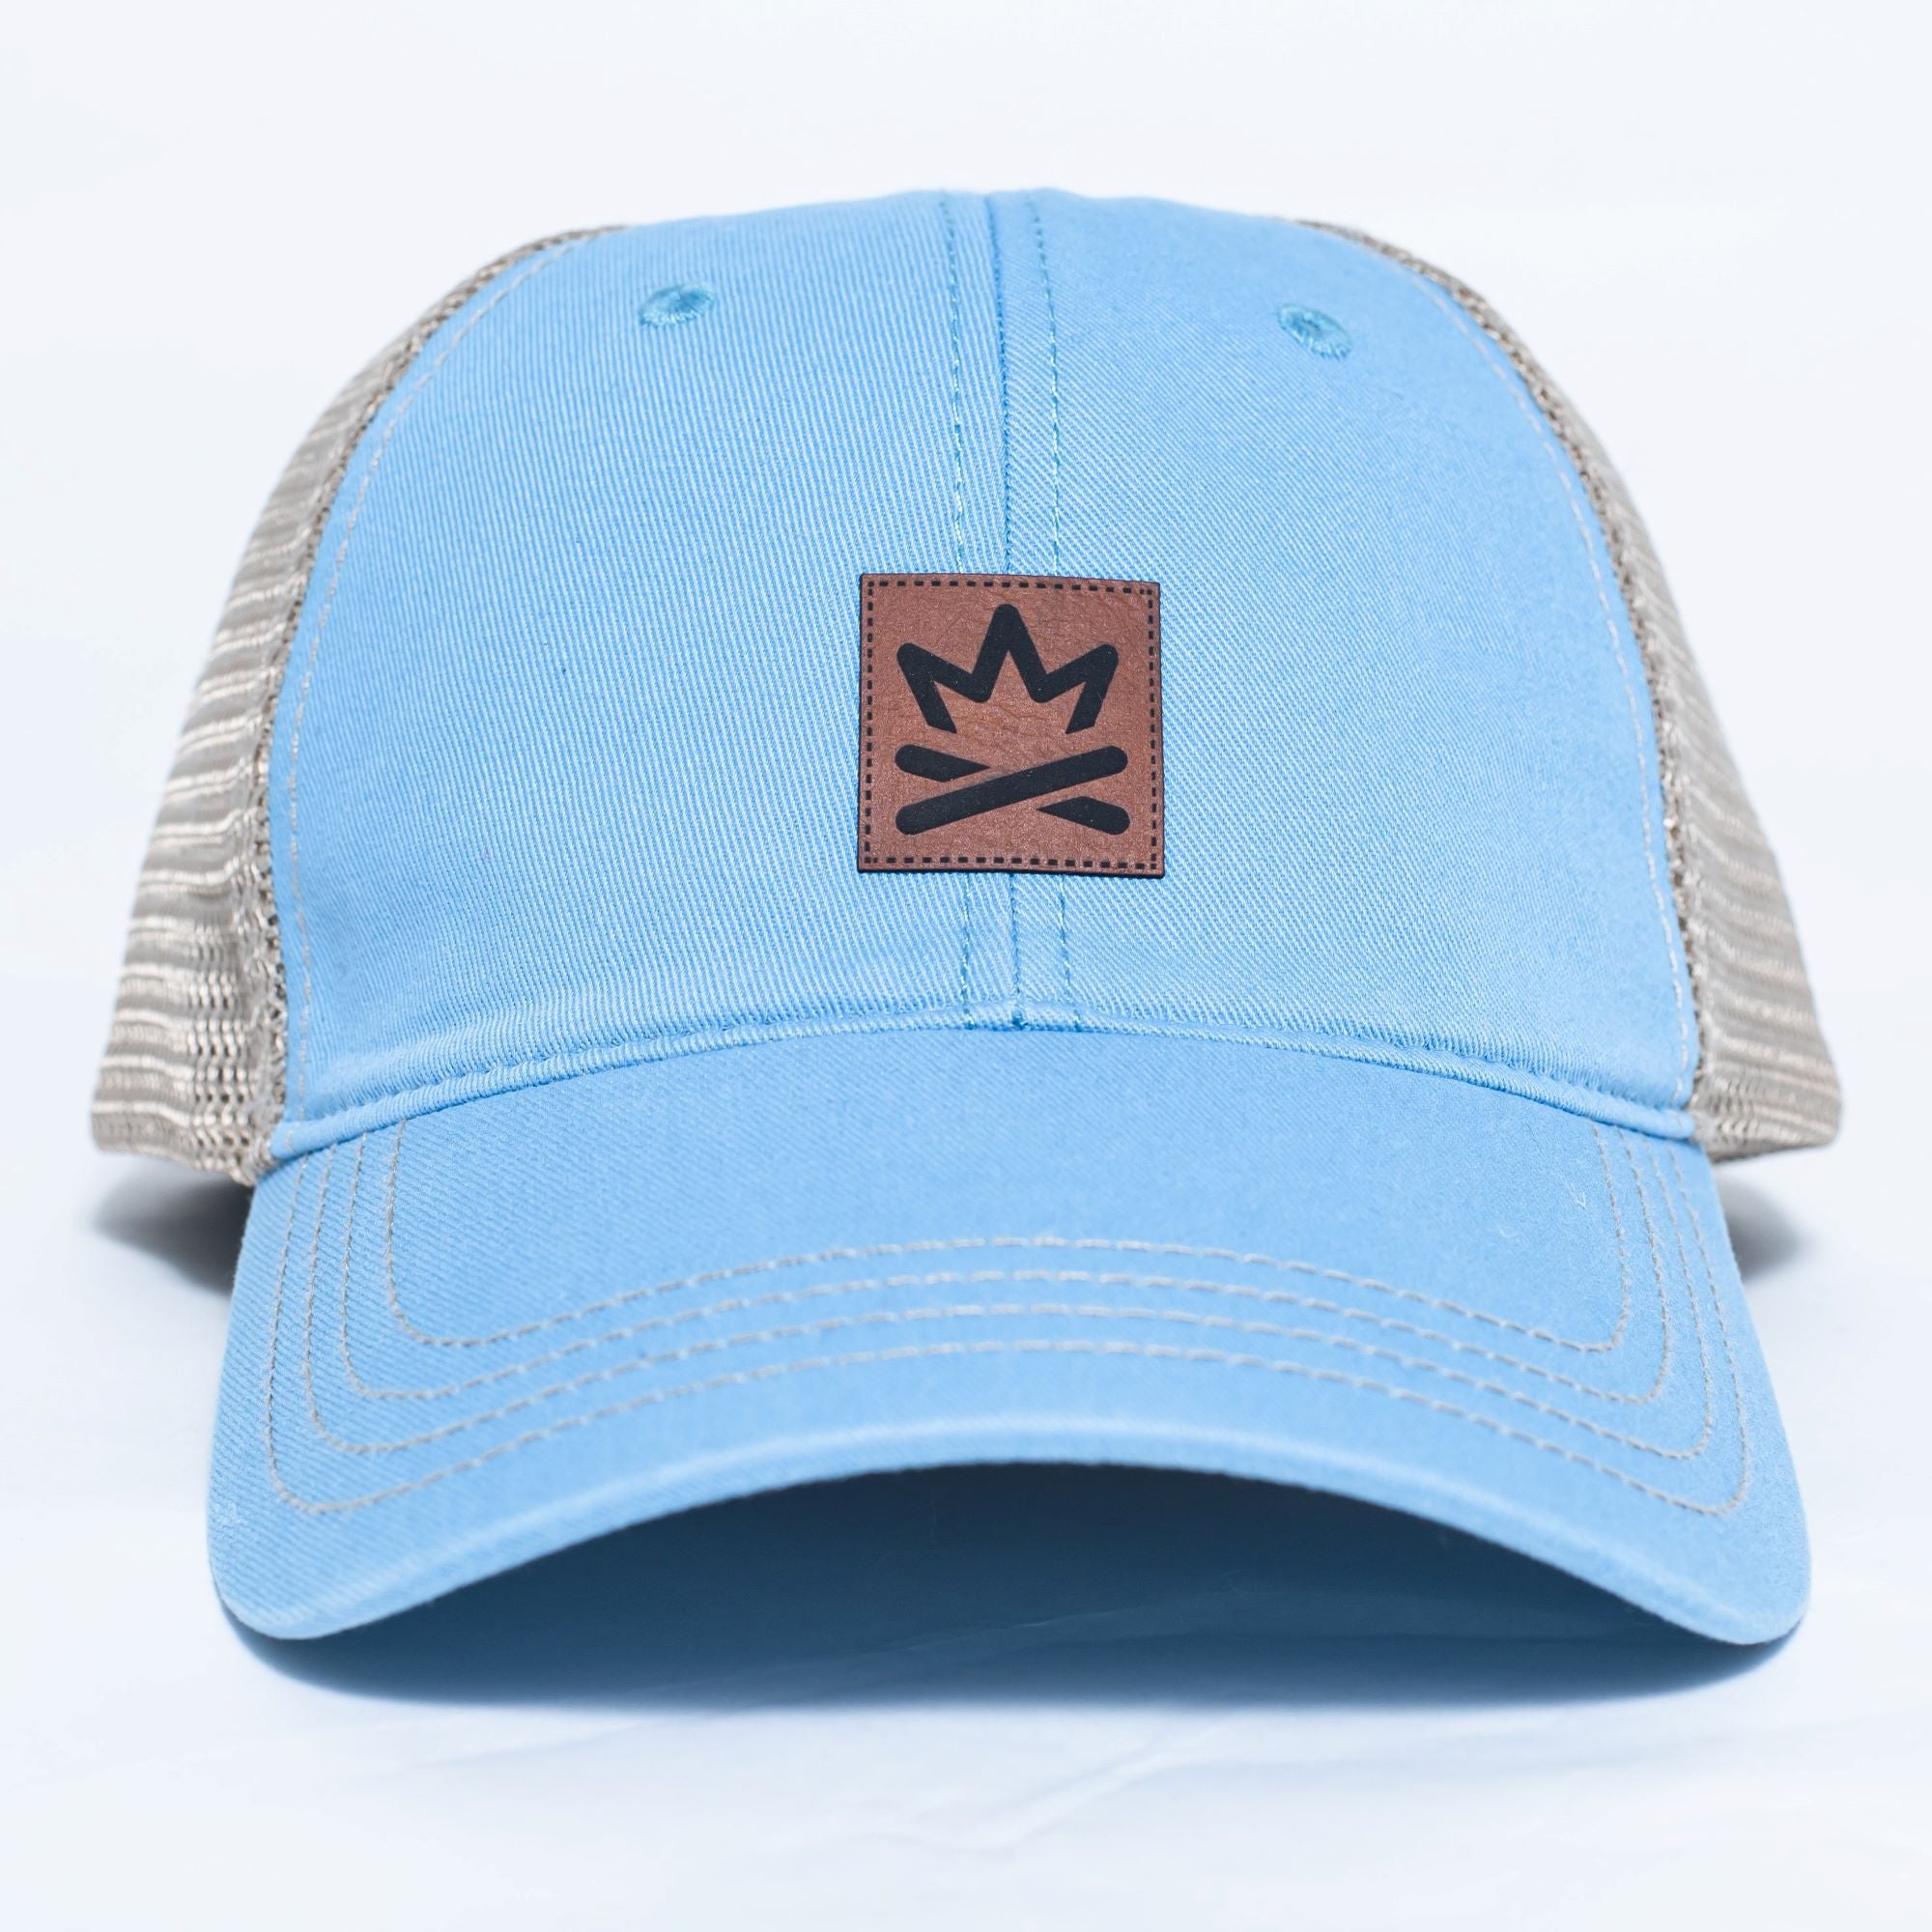 Lake Life Patch Hat | Minnesota-Made Apparel & Accessories | Cabin Guy